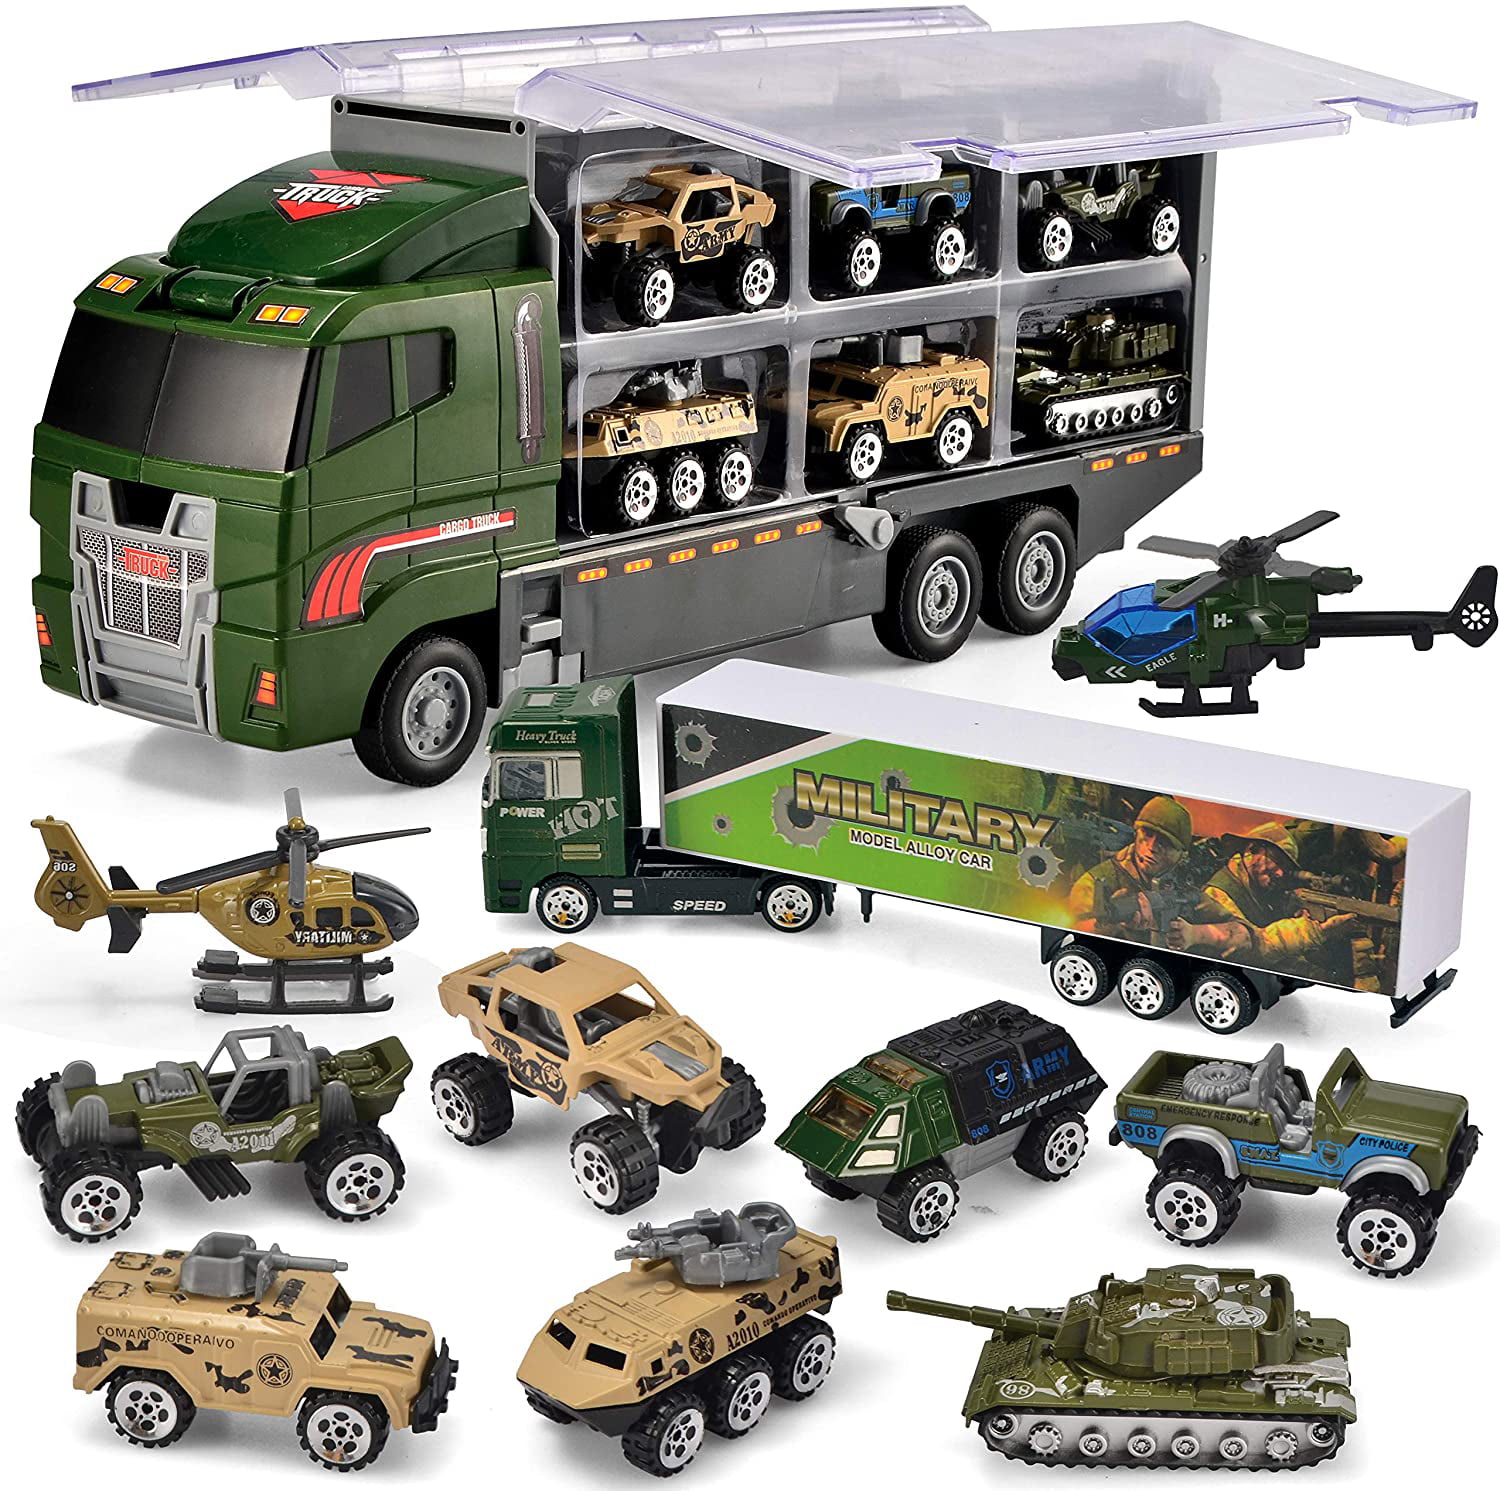 6 Pack Assorted Alloy Die-cast Military Vehicles Models Car Playmobil Toys Set 